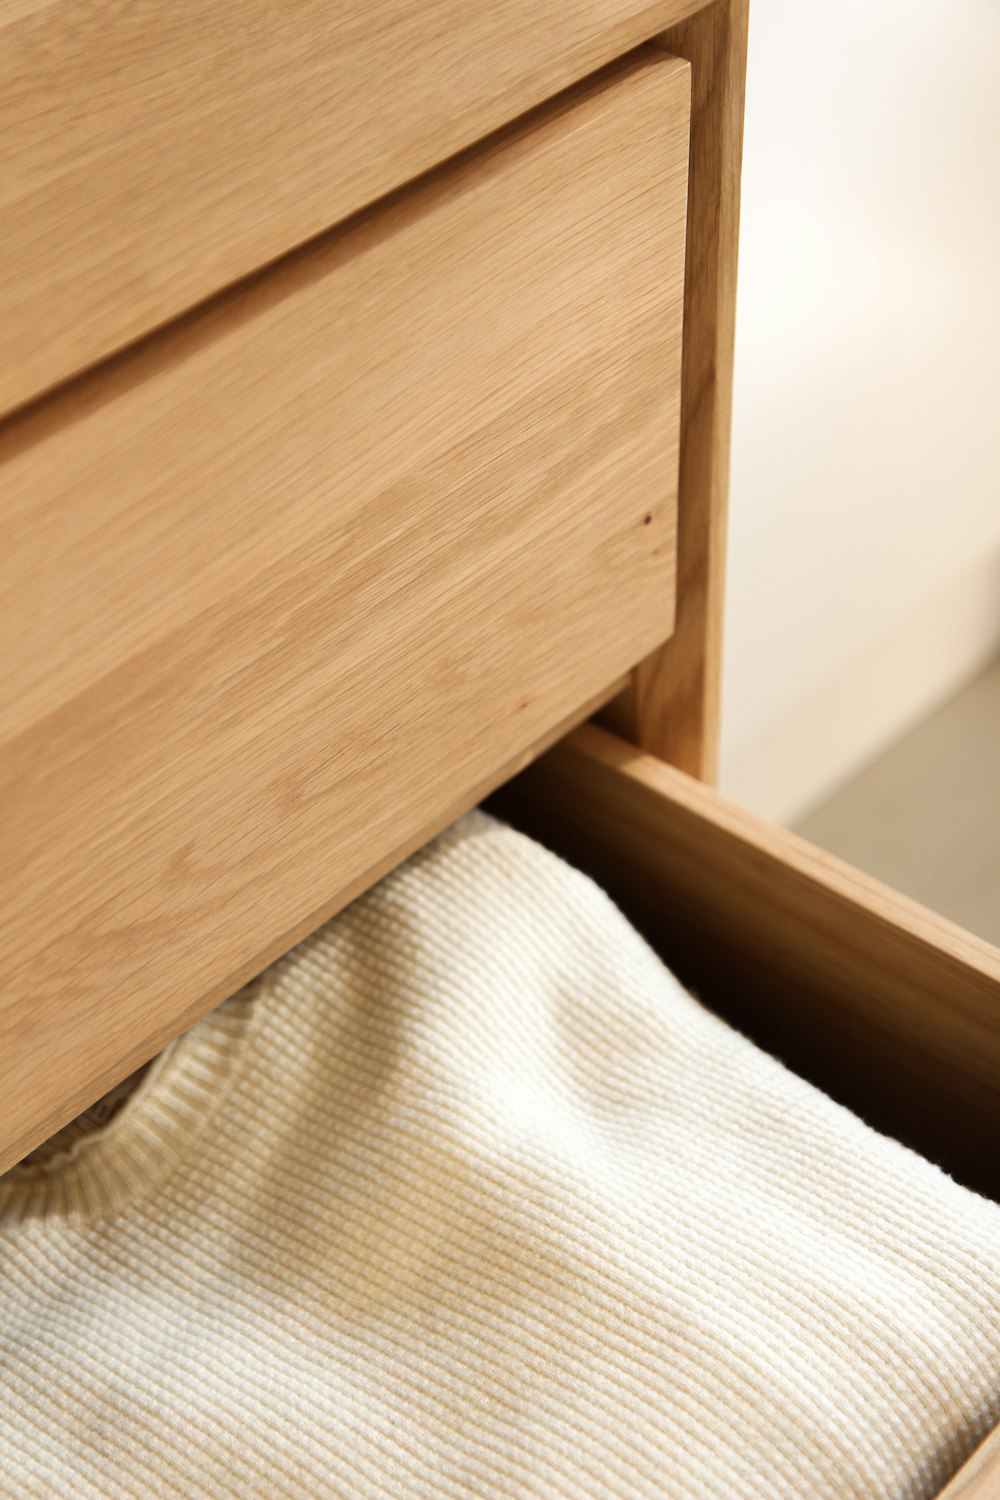 white textile beside brown wooden drawer